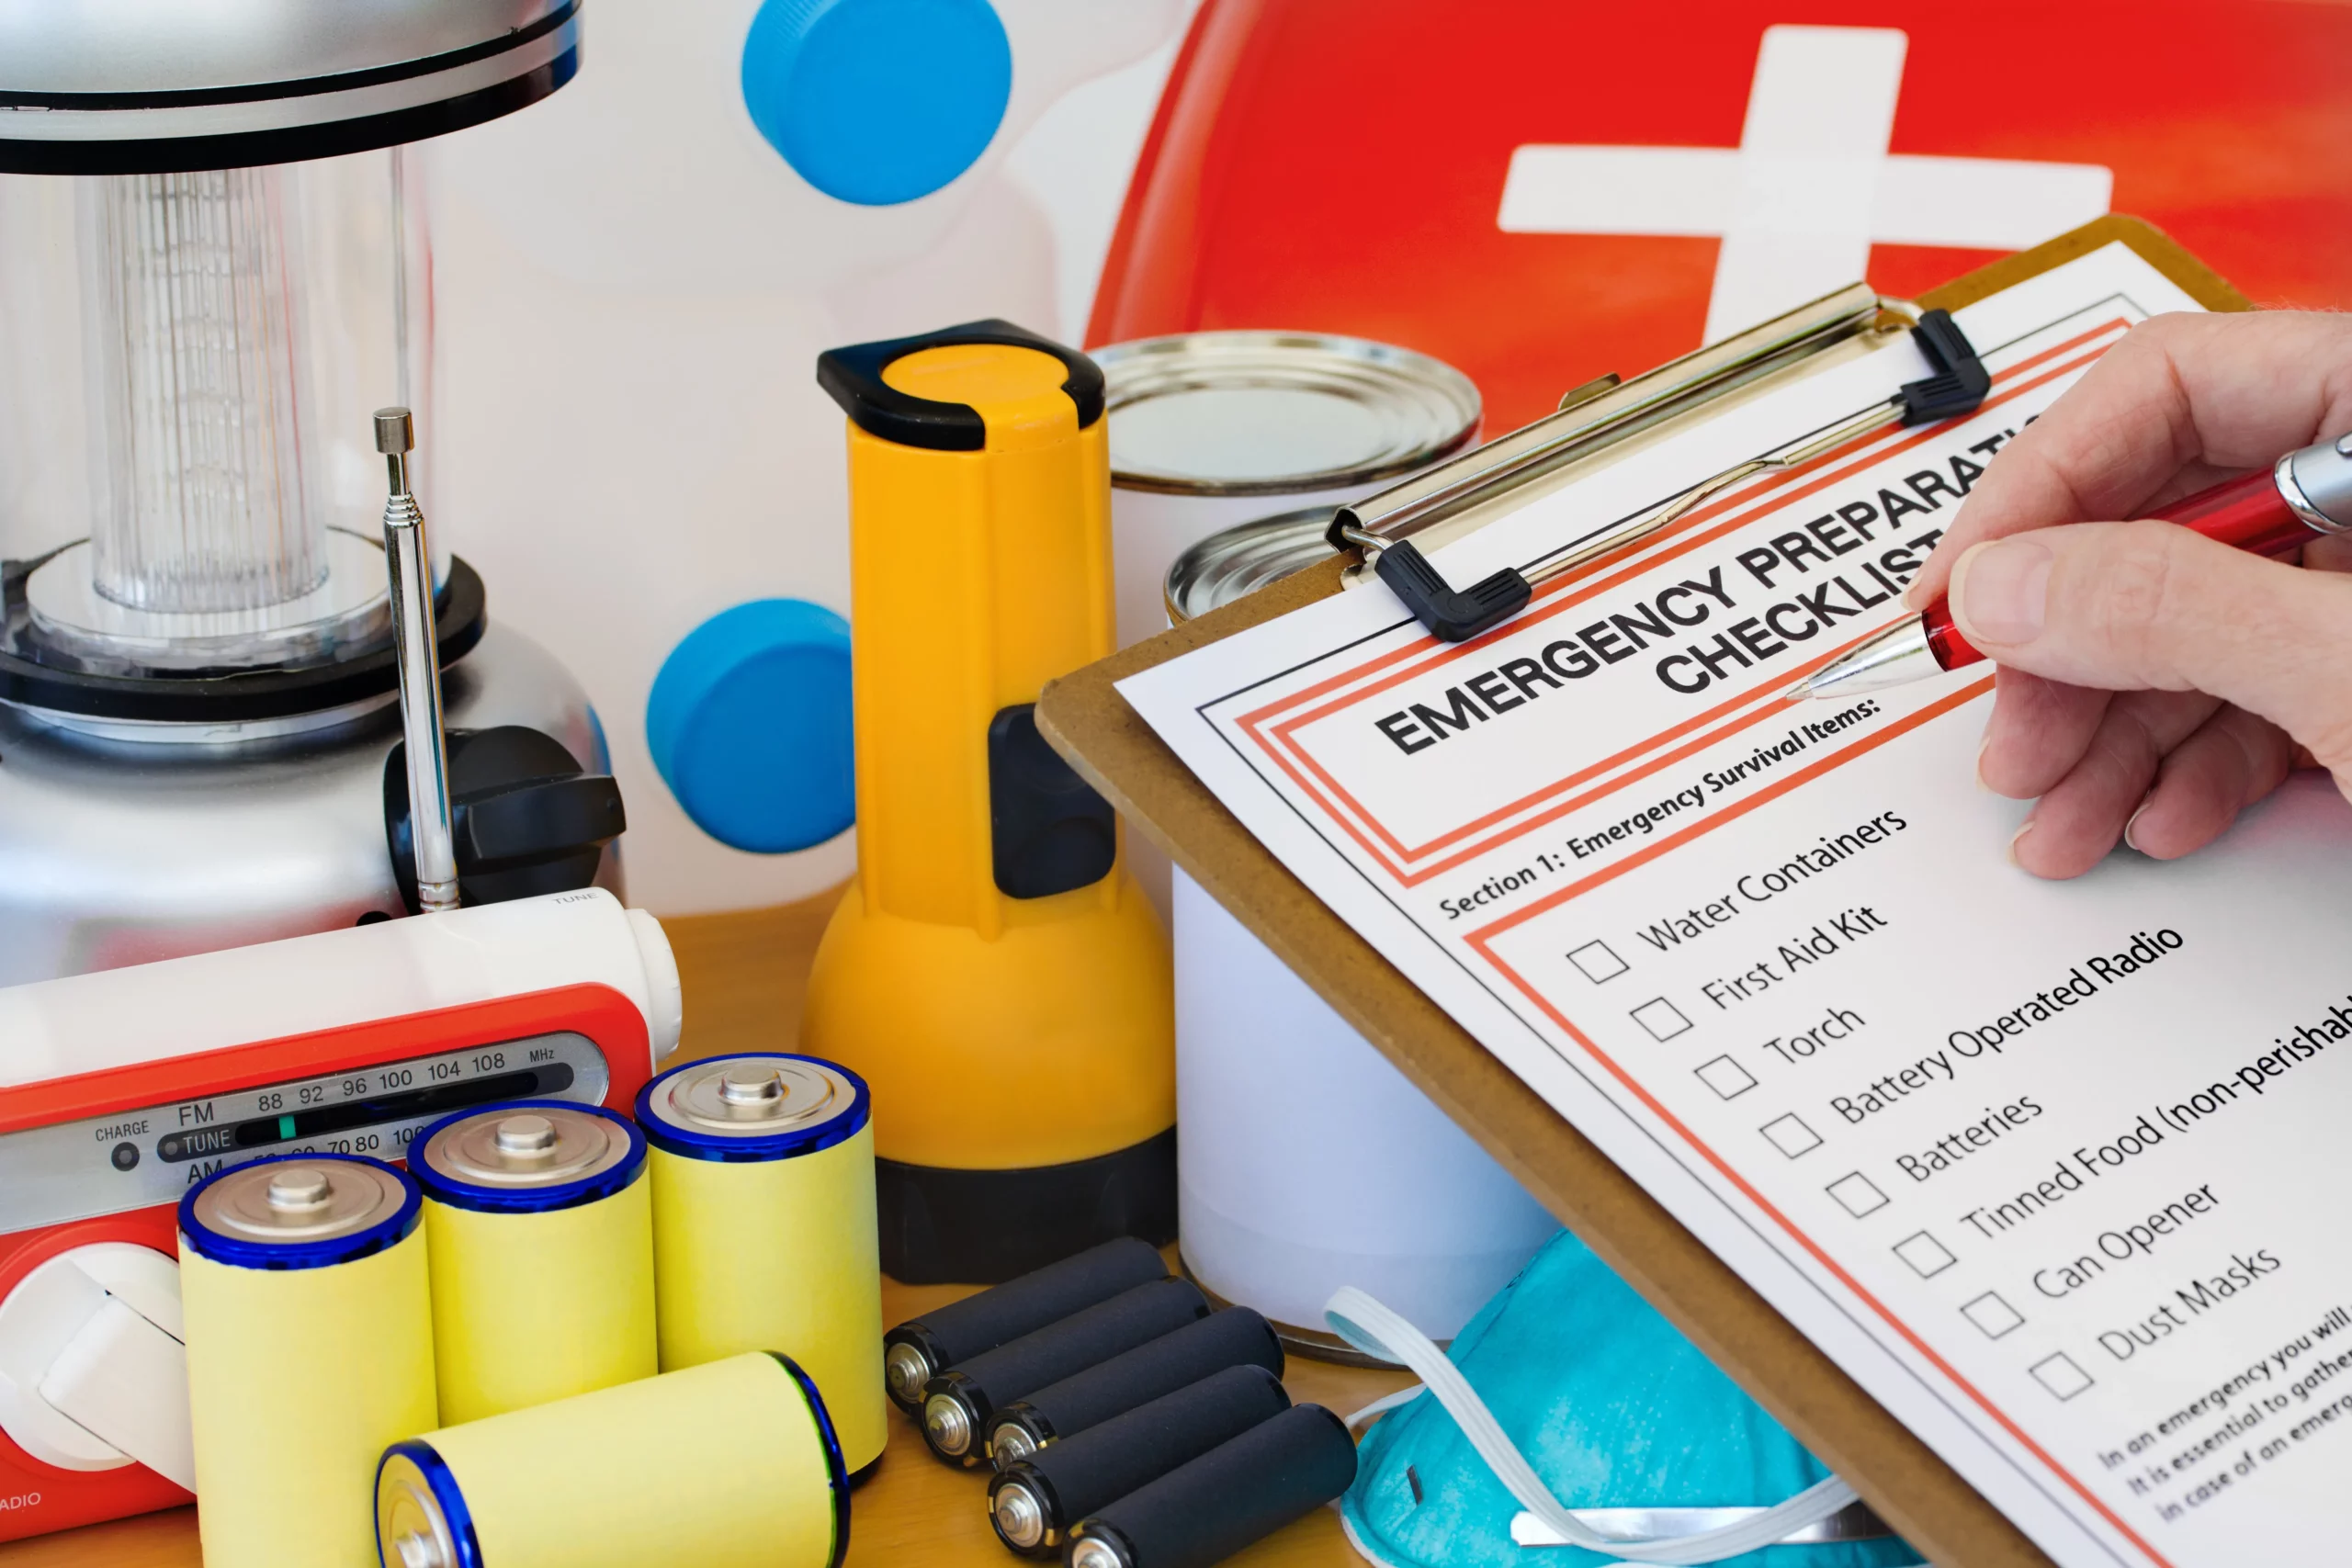 Is Your Family Ready? A Checklist for Hurricane Preparedness